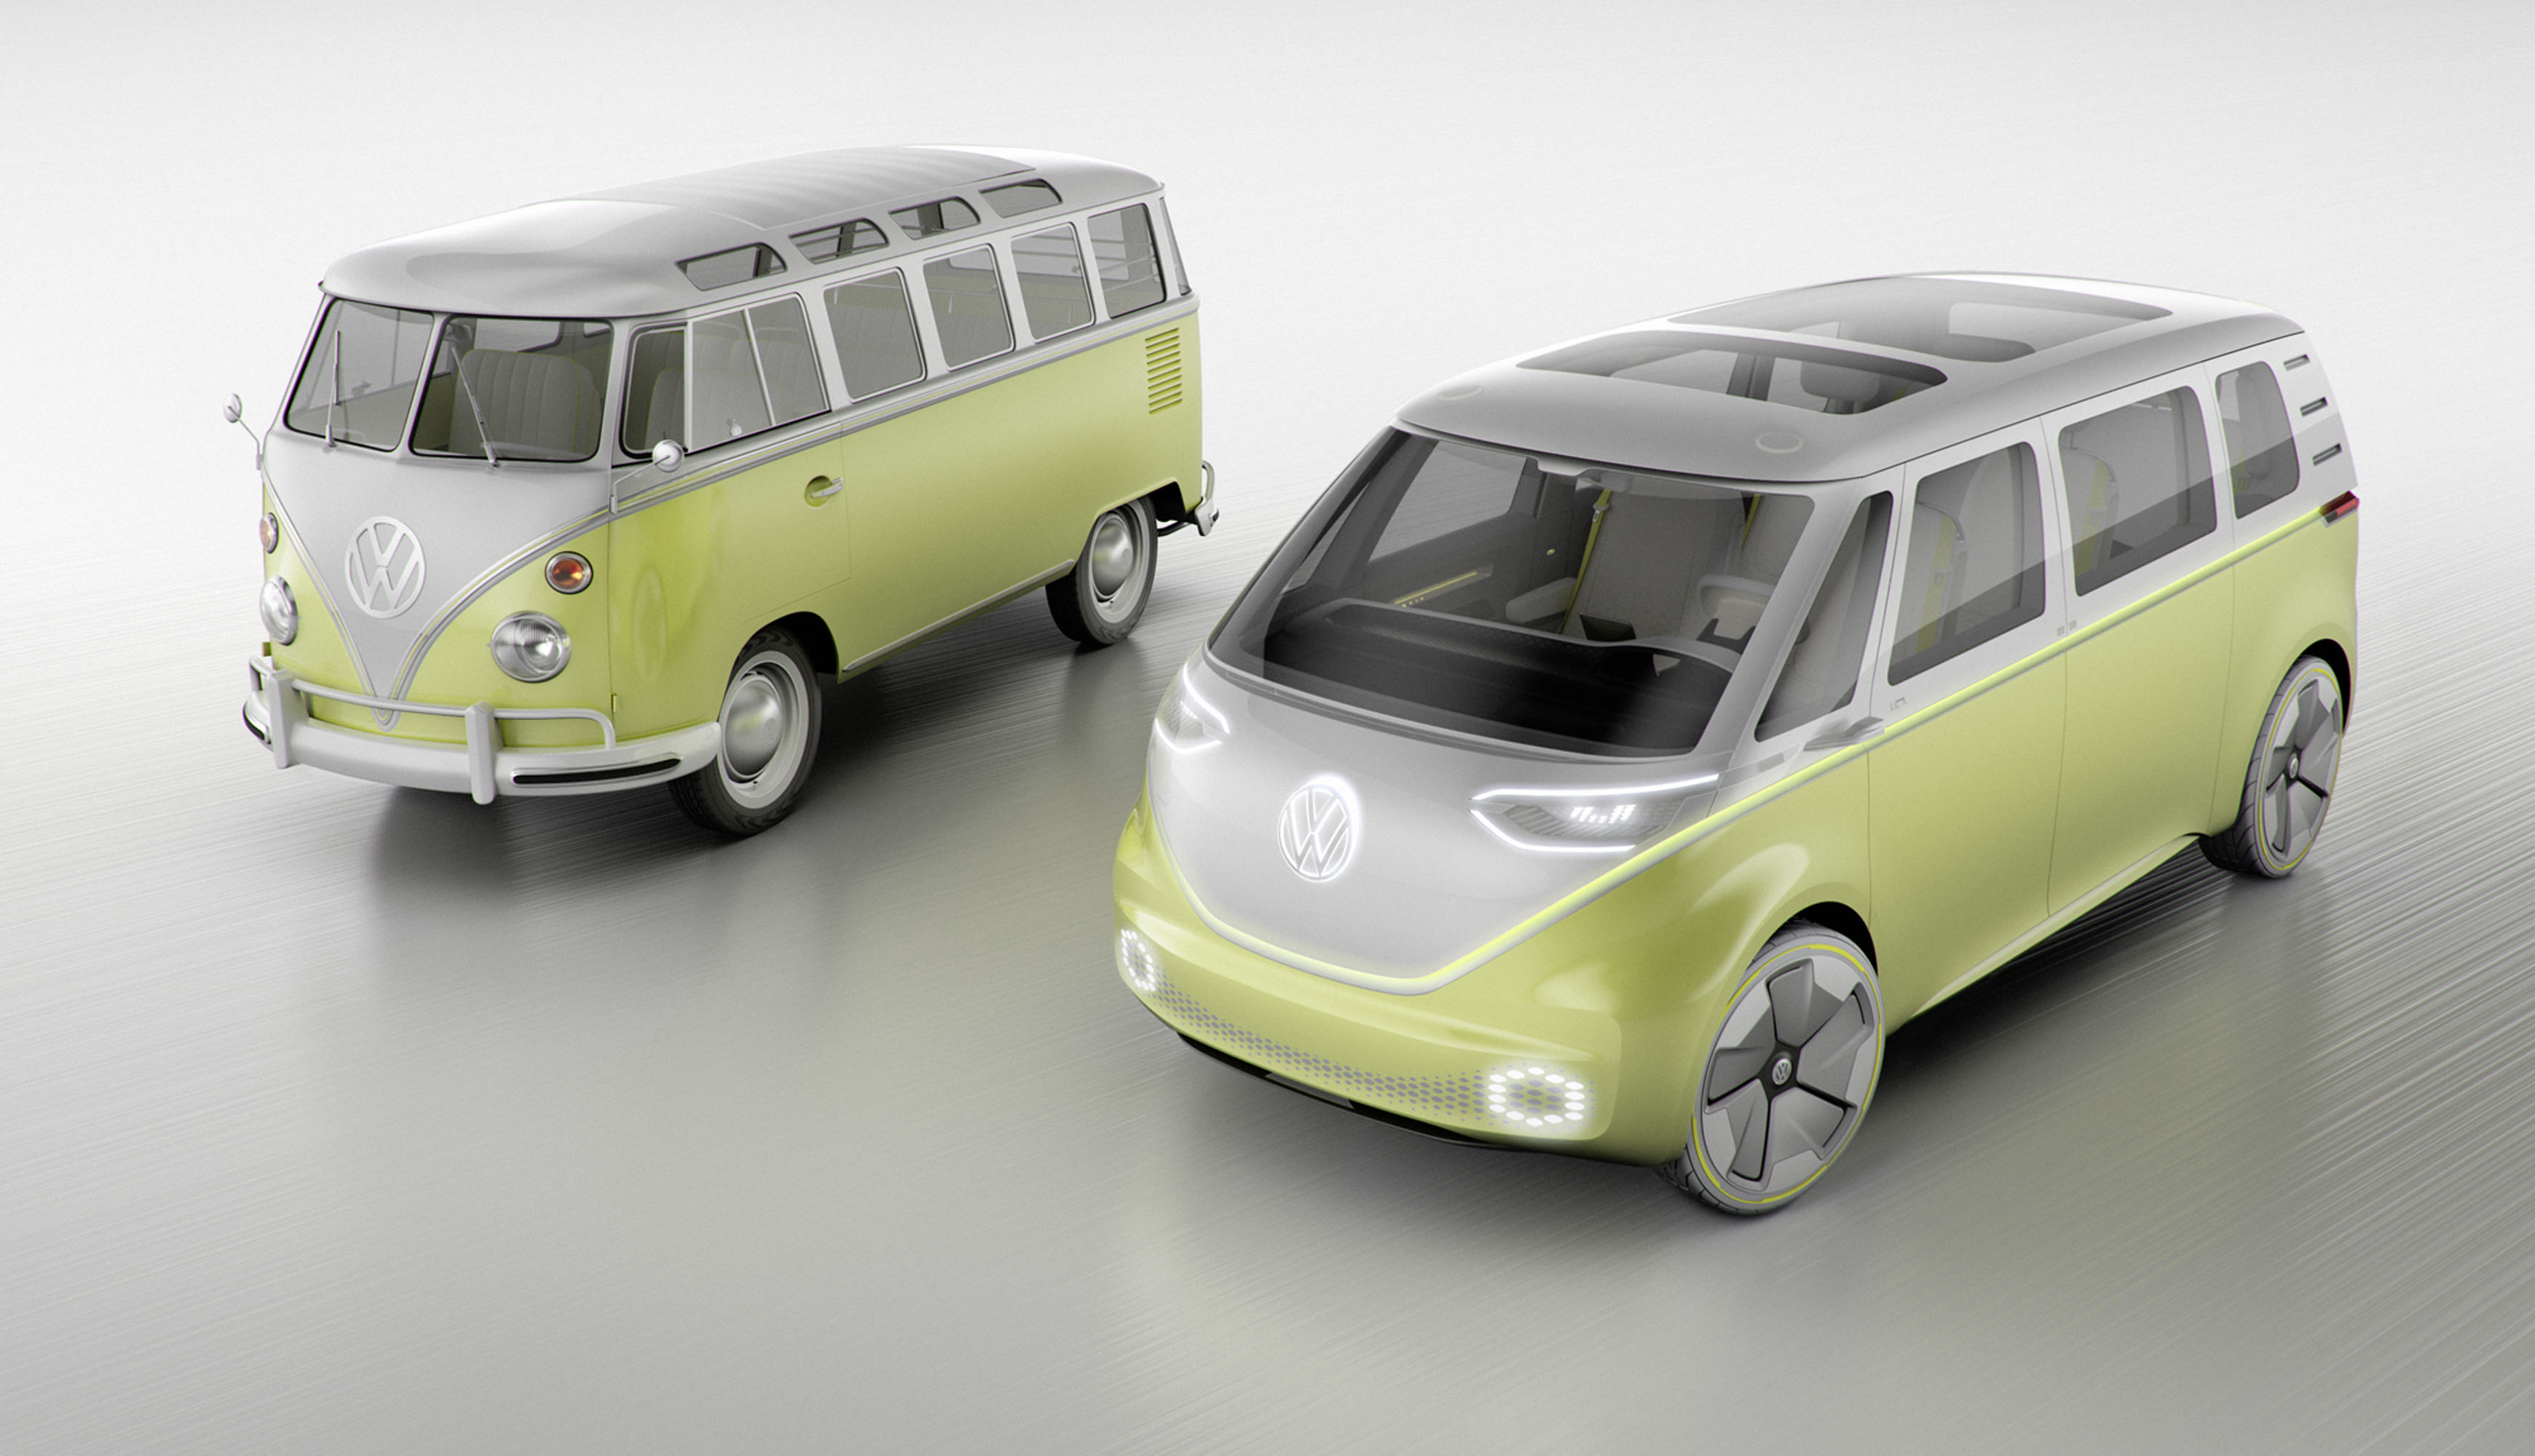 VW Taps Its Hippie Heritage With an 